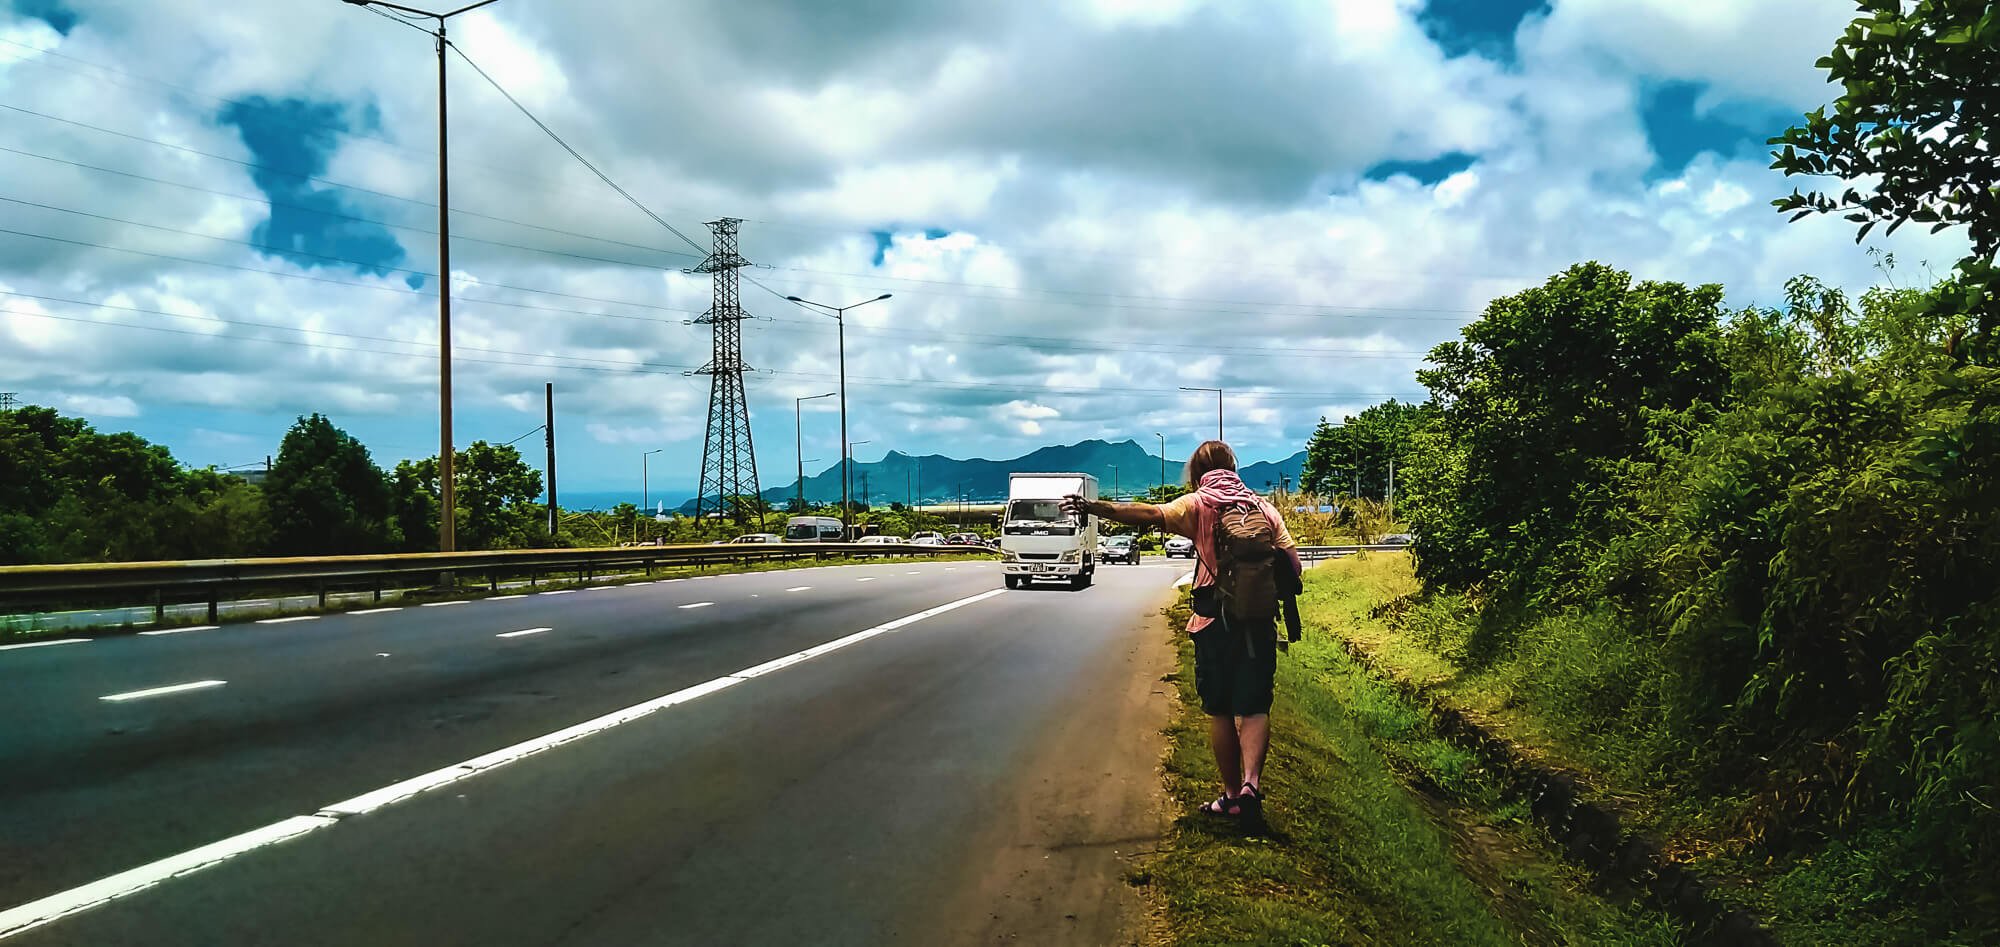 A traveller in Mauritius hitchhikes to reduce his trip cost